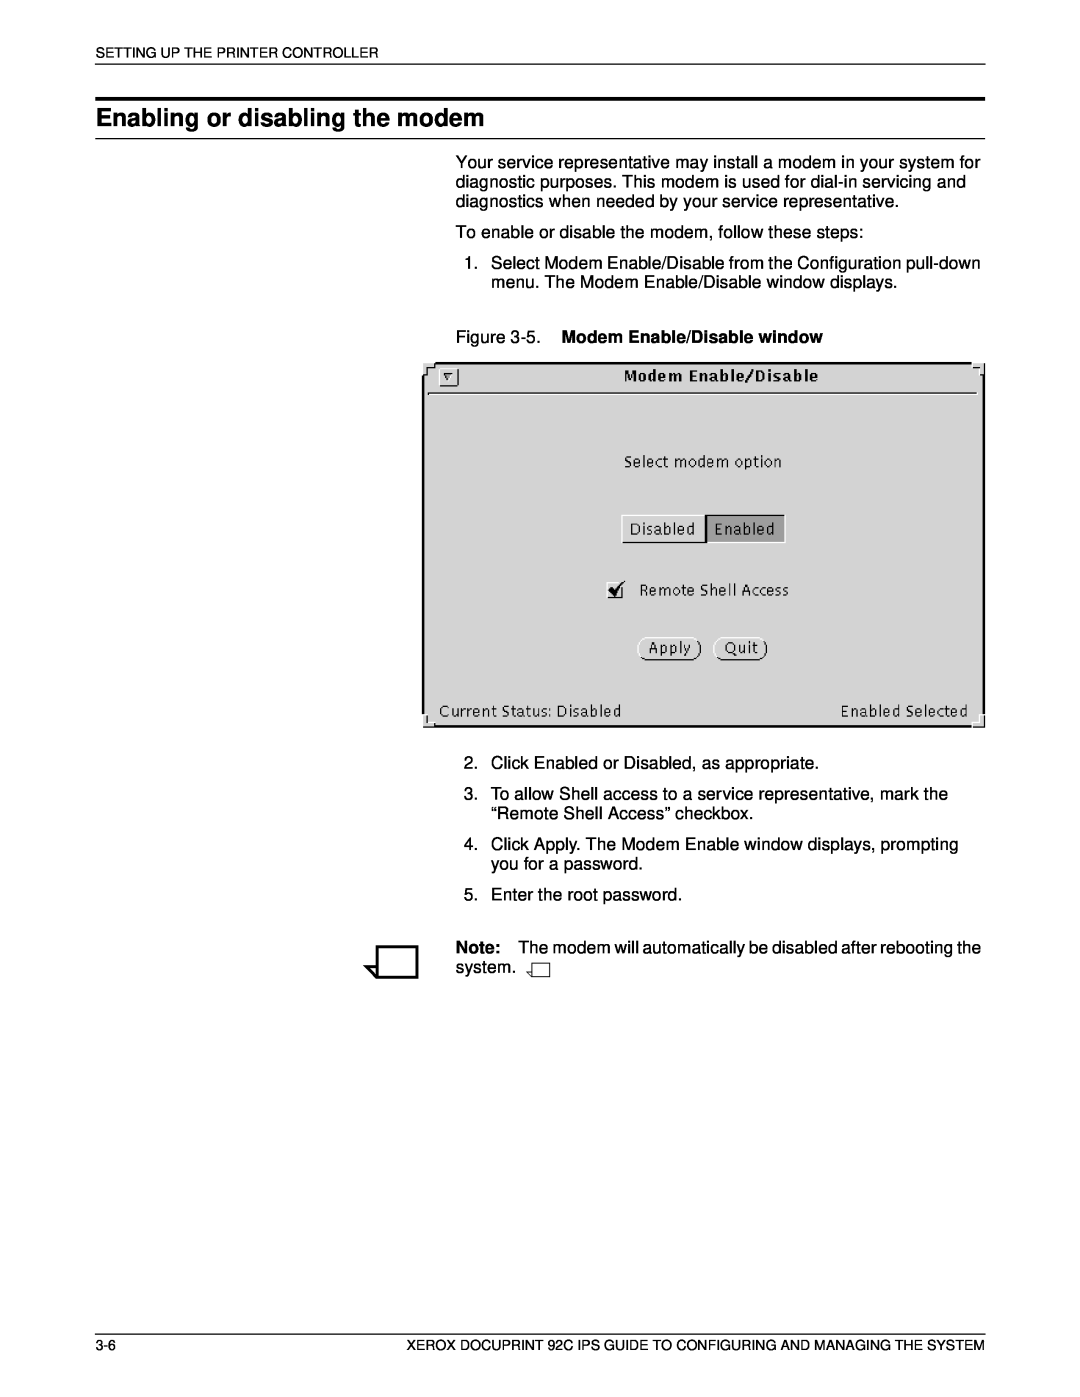 Xerox 92C IPS manual Enabling or disabling the modem, 5. Modem Enable/Disable window 